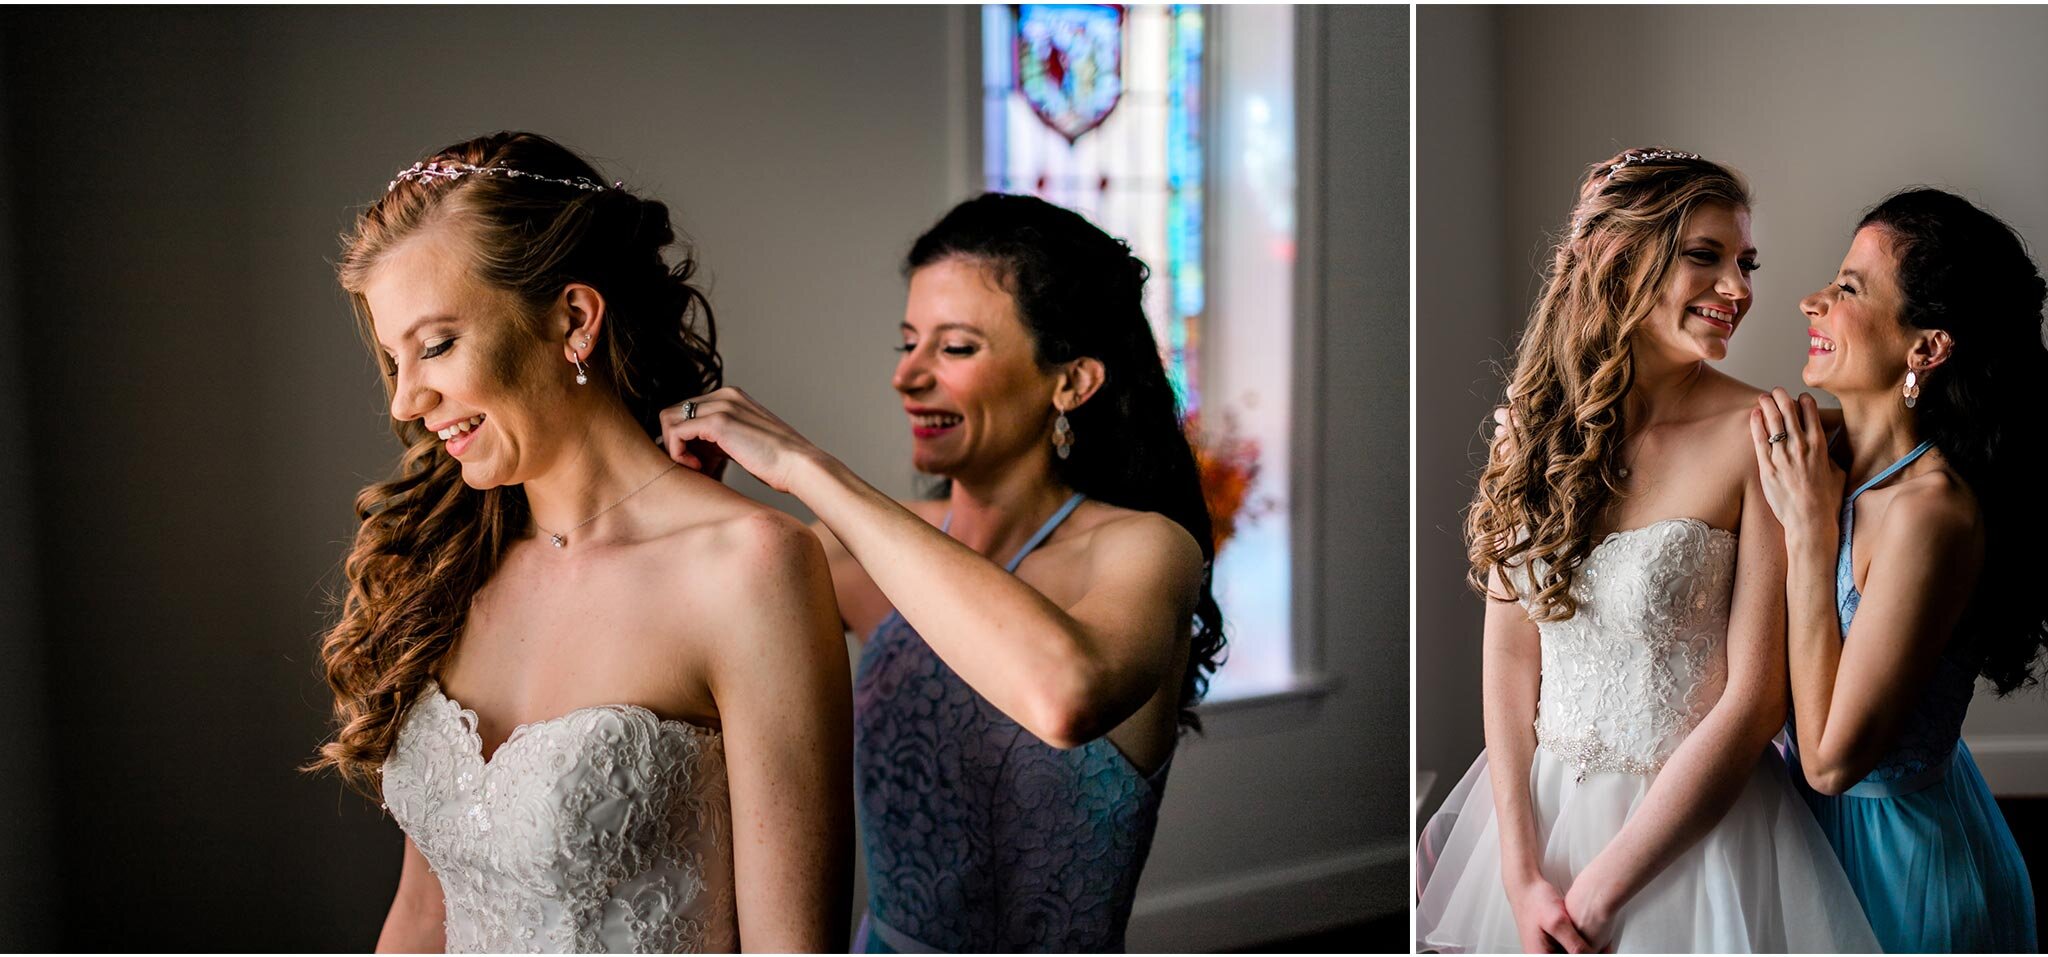 Durham Wedding Photography | By G. Lin Photography | Sister putting on necklace on bride